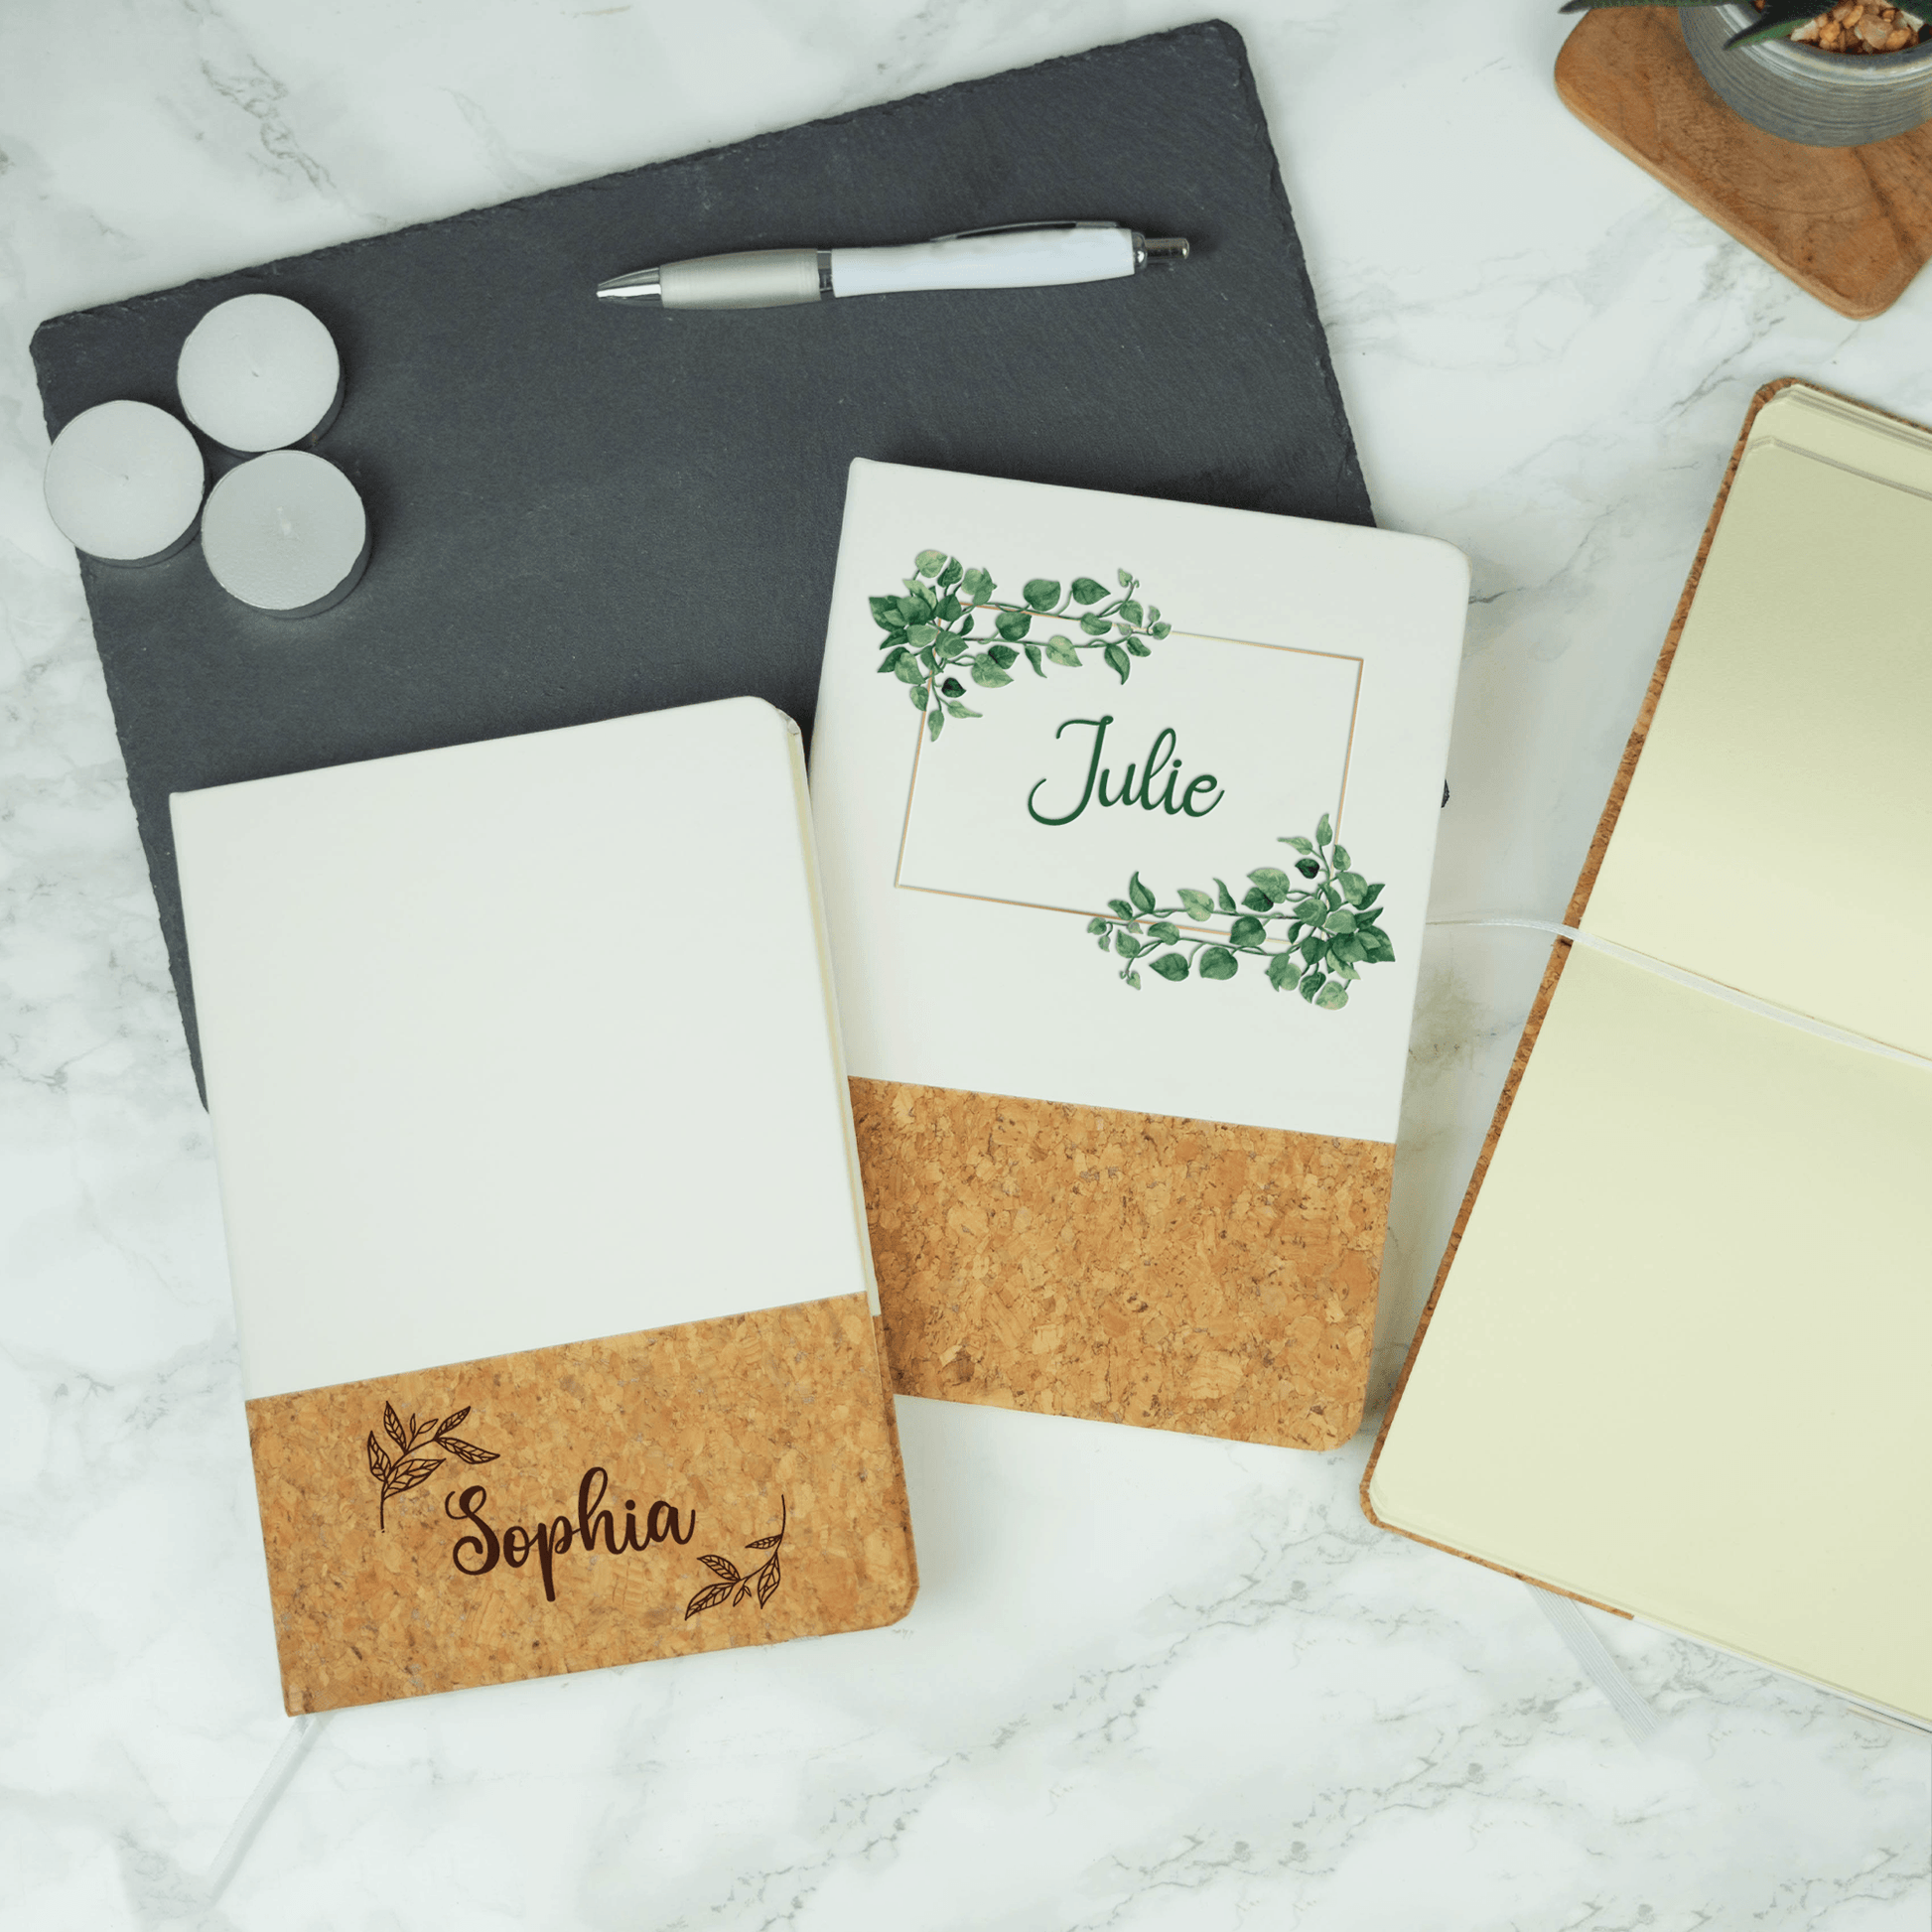 Personalised White & Cork Notebook - So Bespoke Gifts